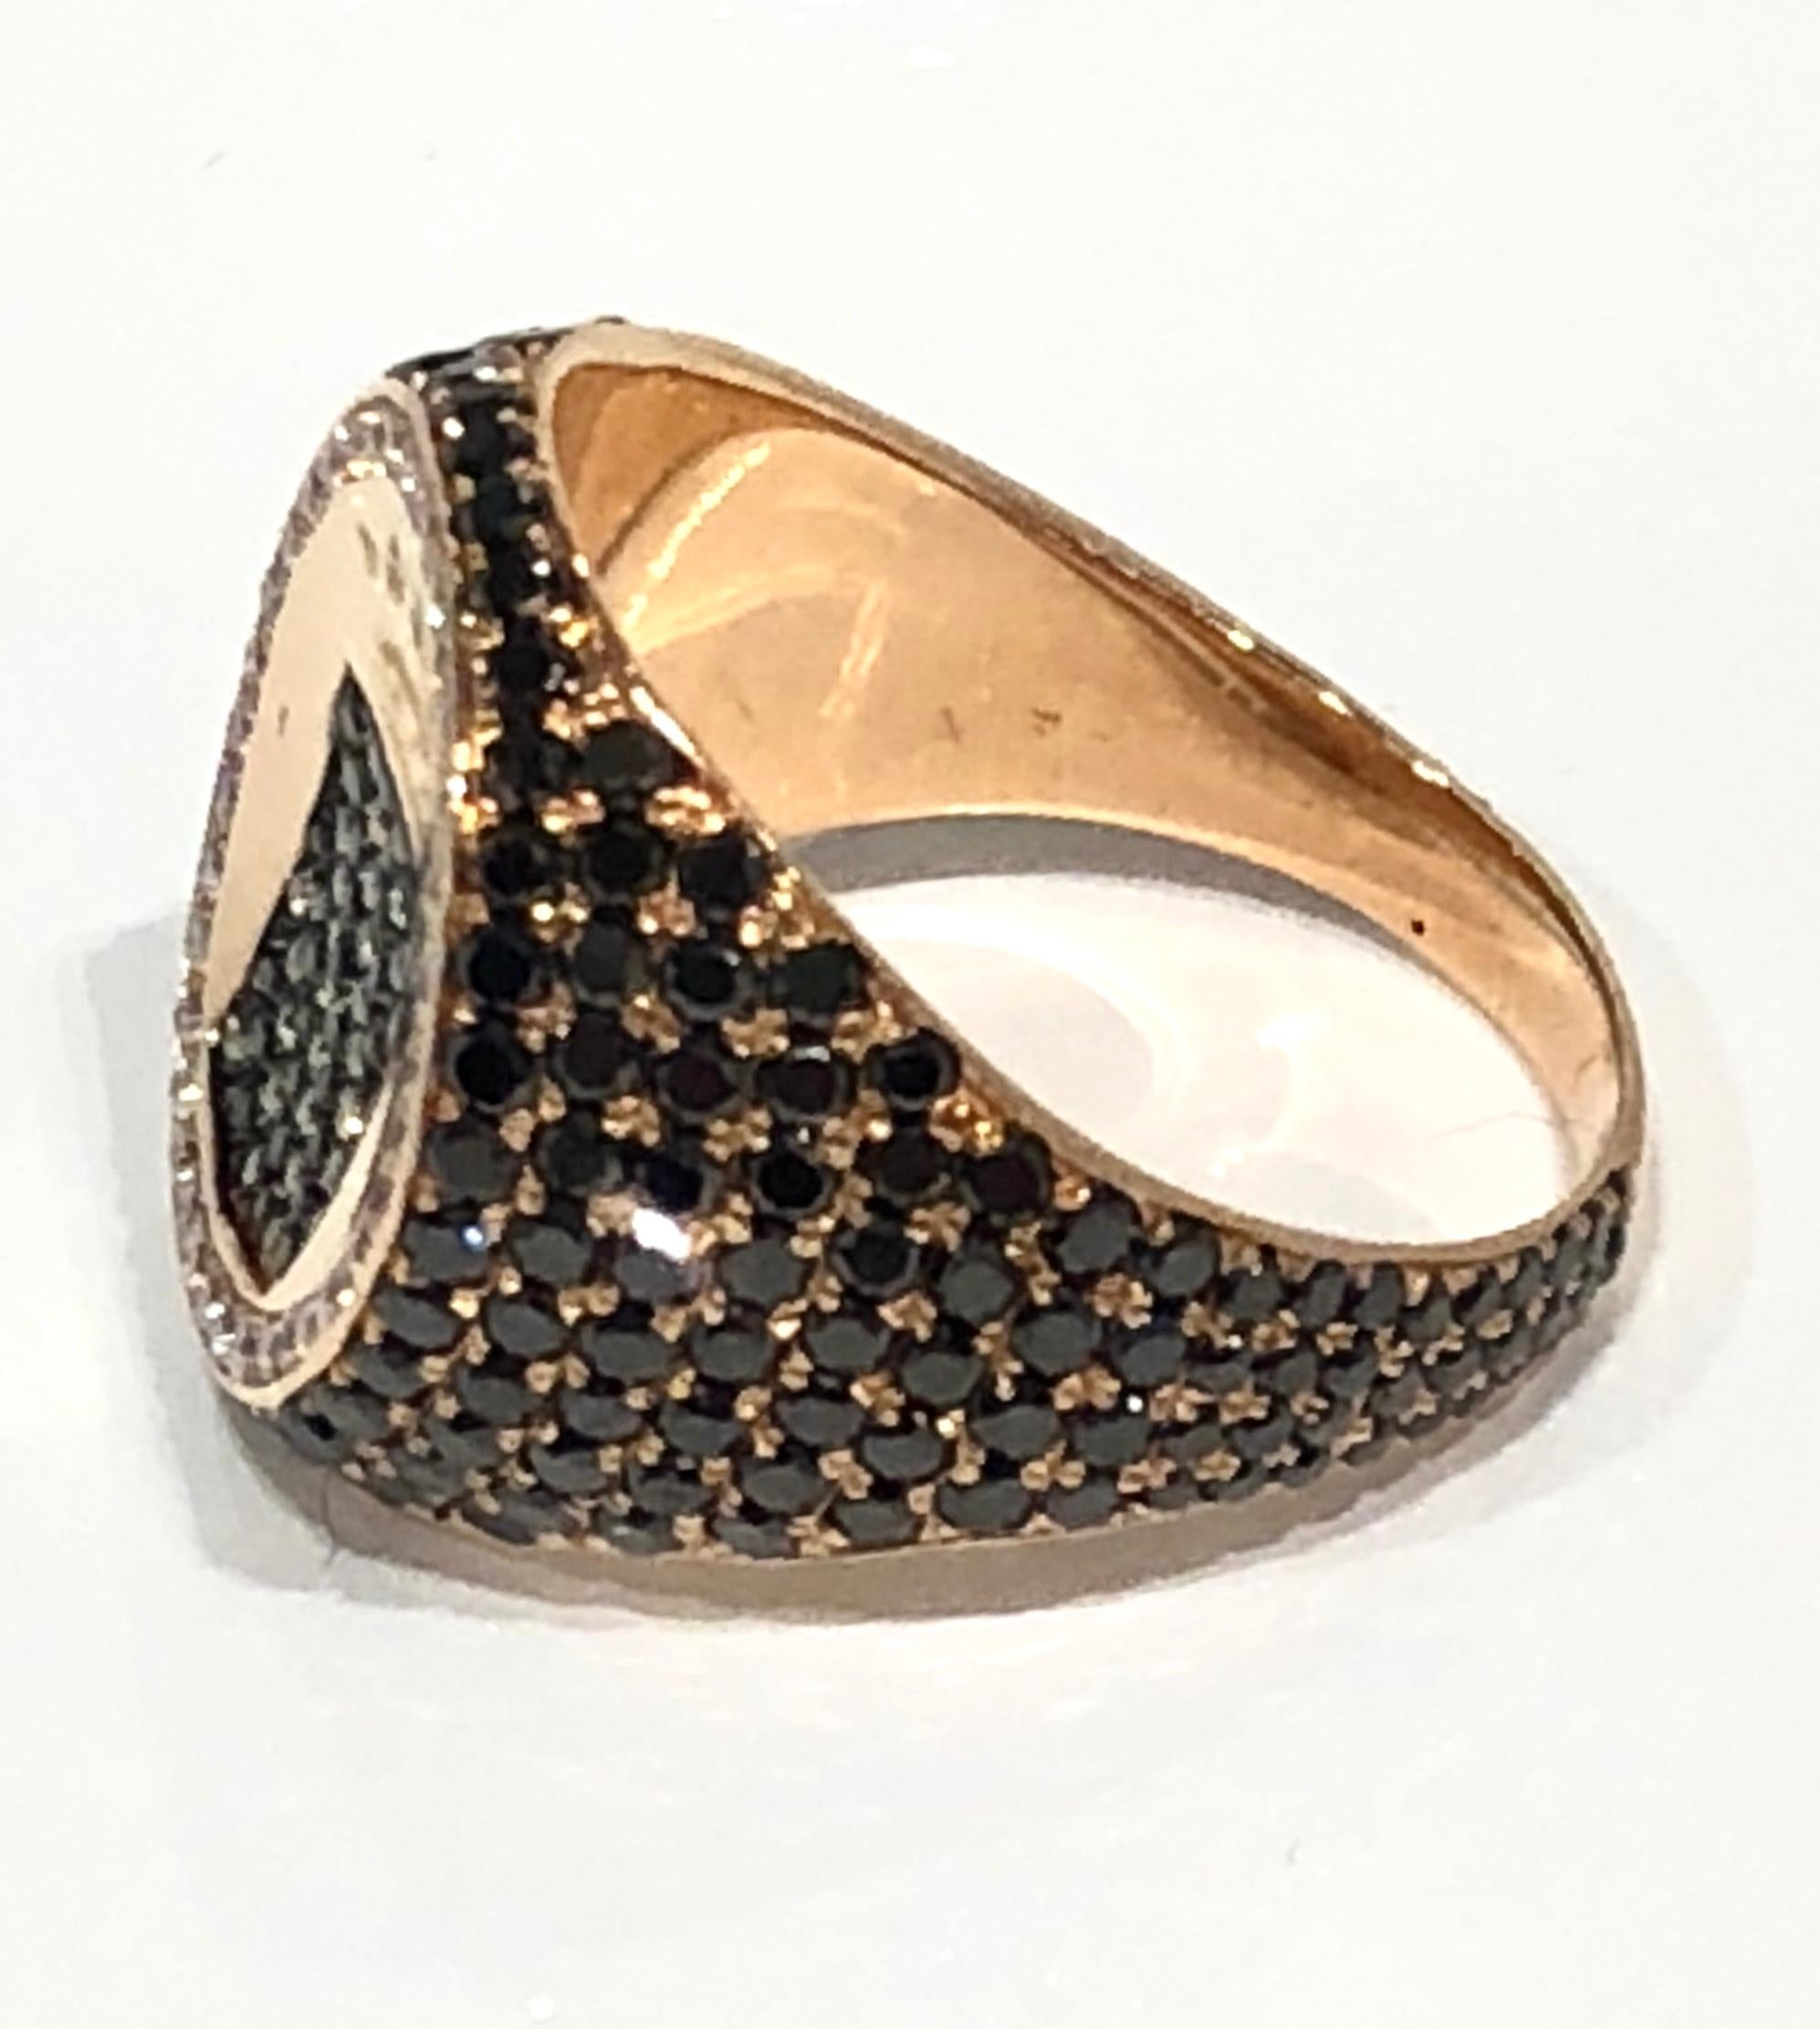 Unisex 18k rose gold Signet Ring with white and black diamond crown face, black pave diamond shank
Designed by Martyn Lawrence Bullard
Can be made in any size, lead time 4 weels